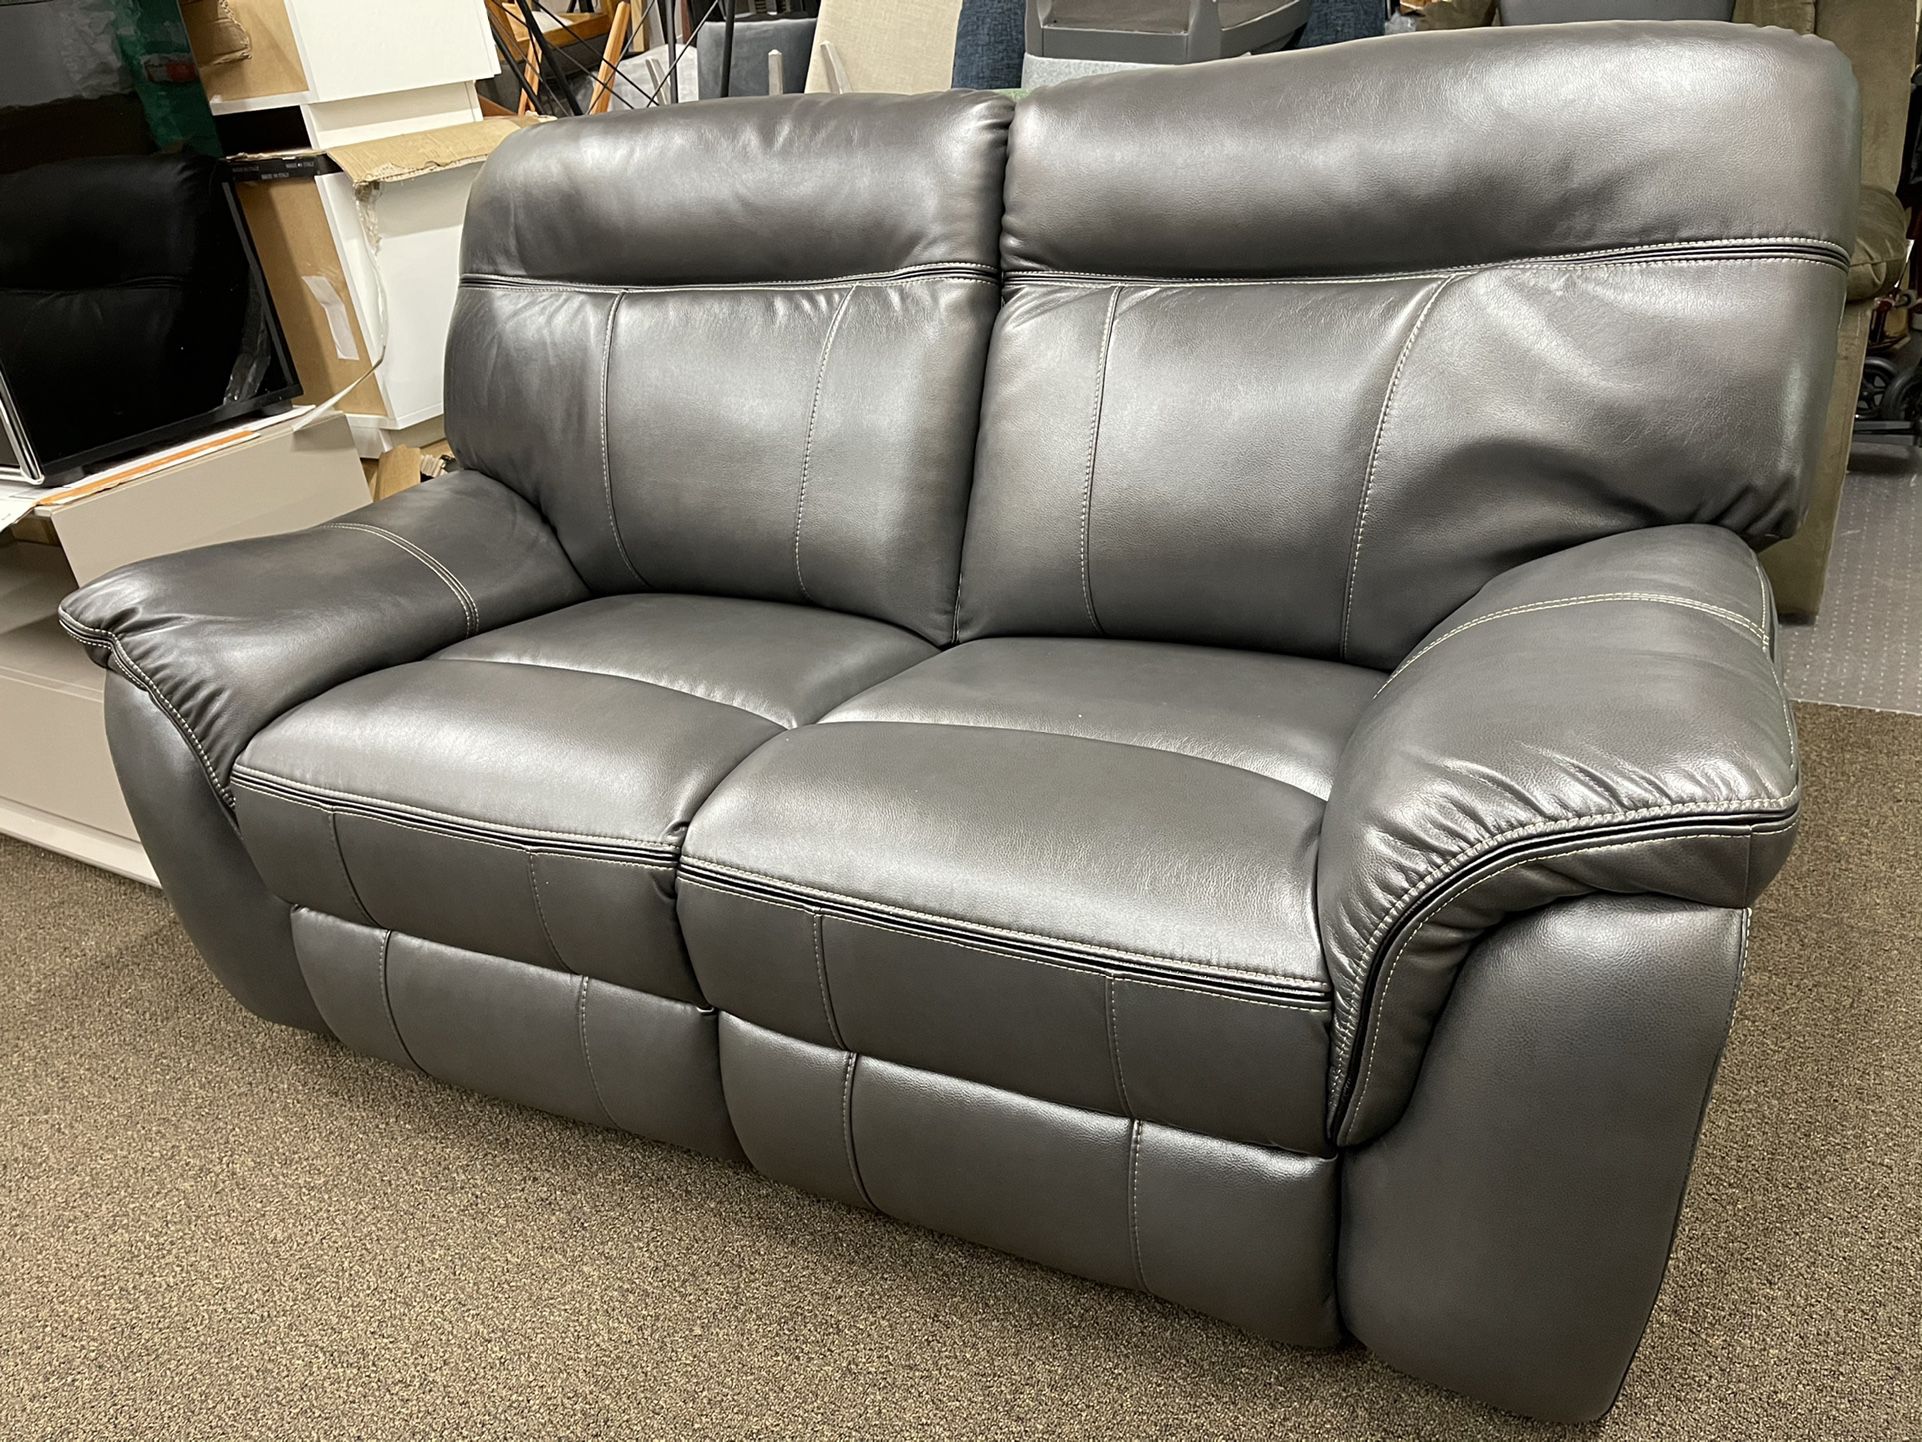 New dark grey color Loveseat in a box By New Classic Furniture